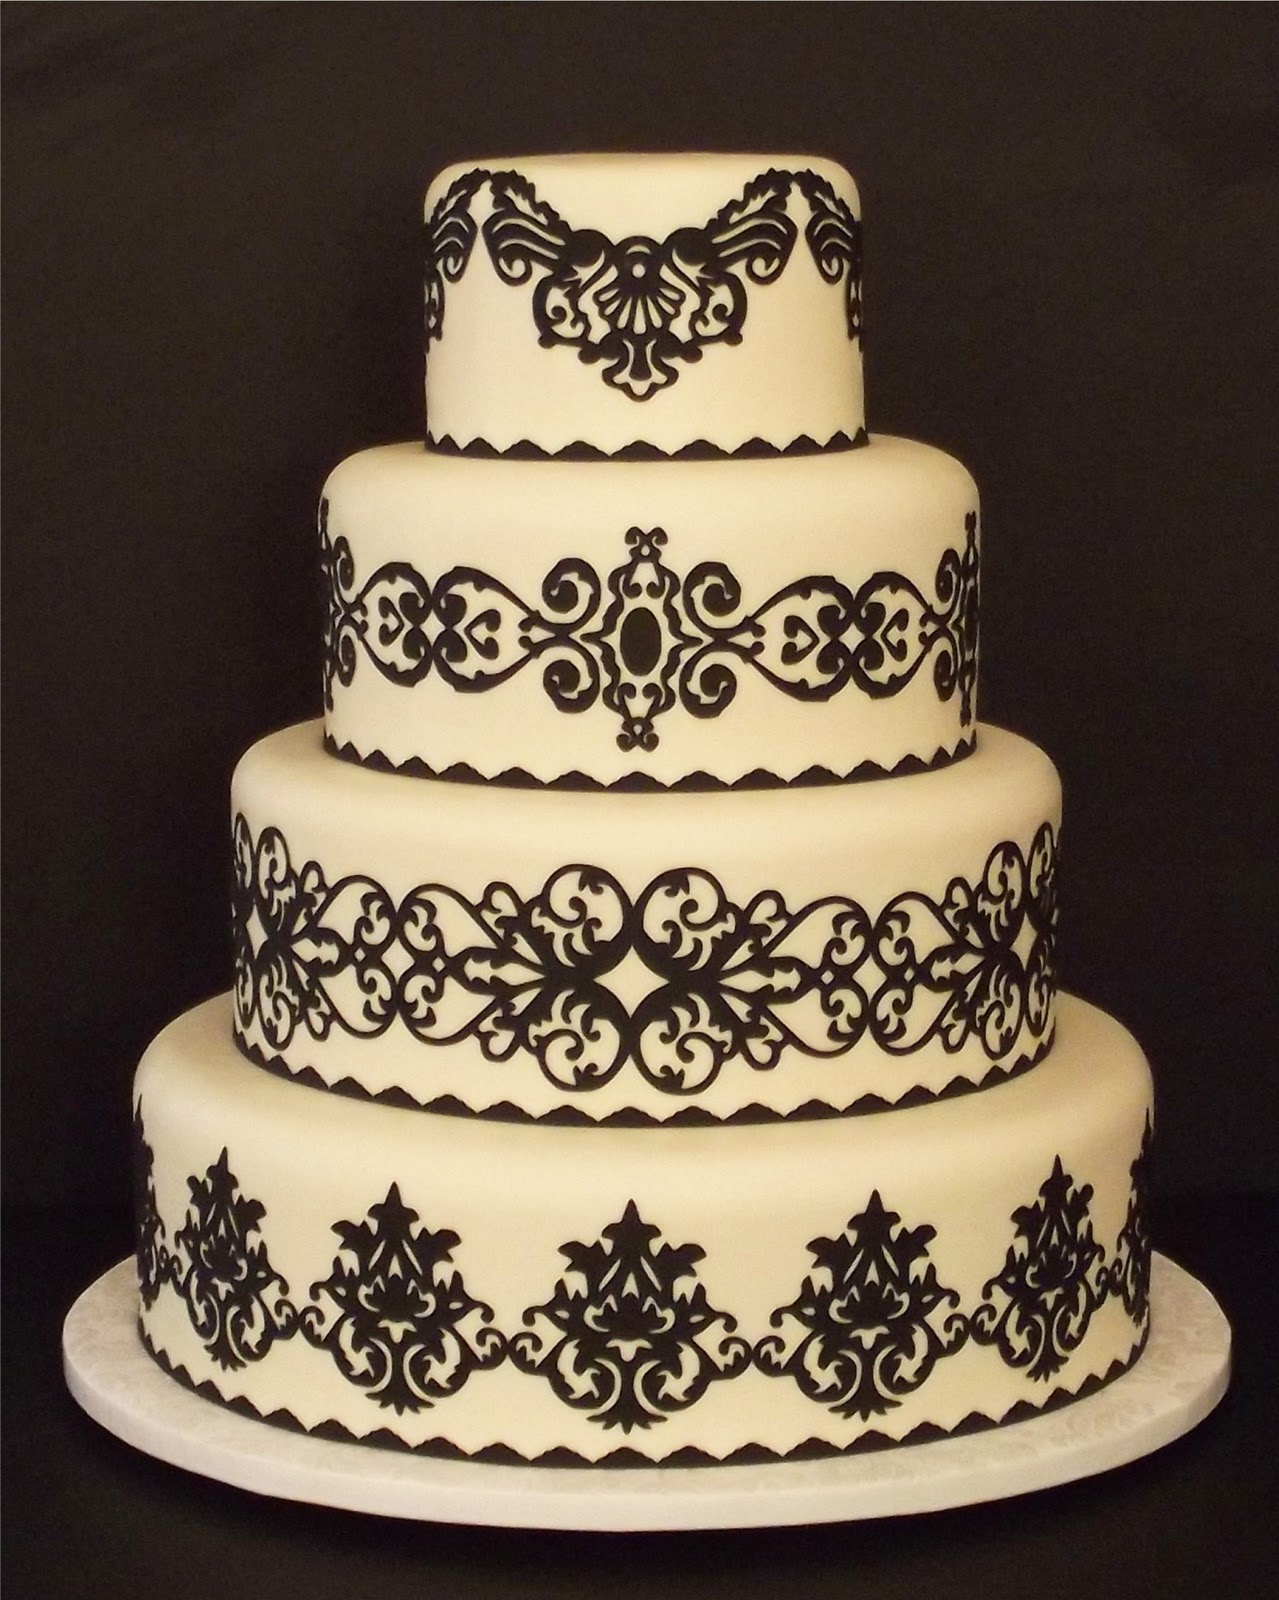 Wedding Cakes with Scroll Designs